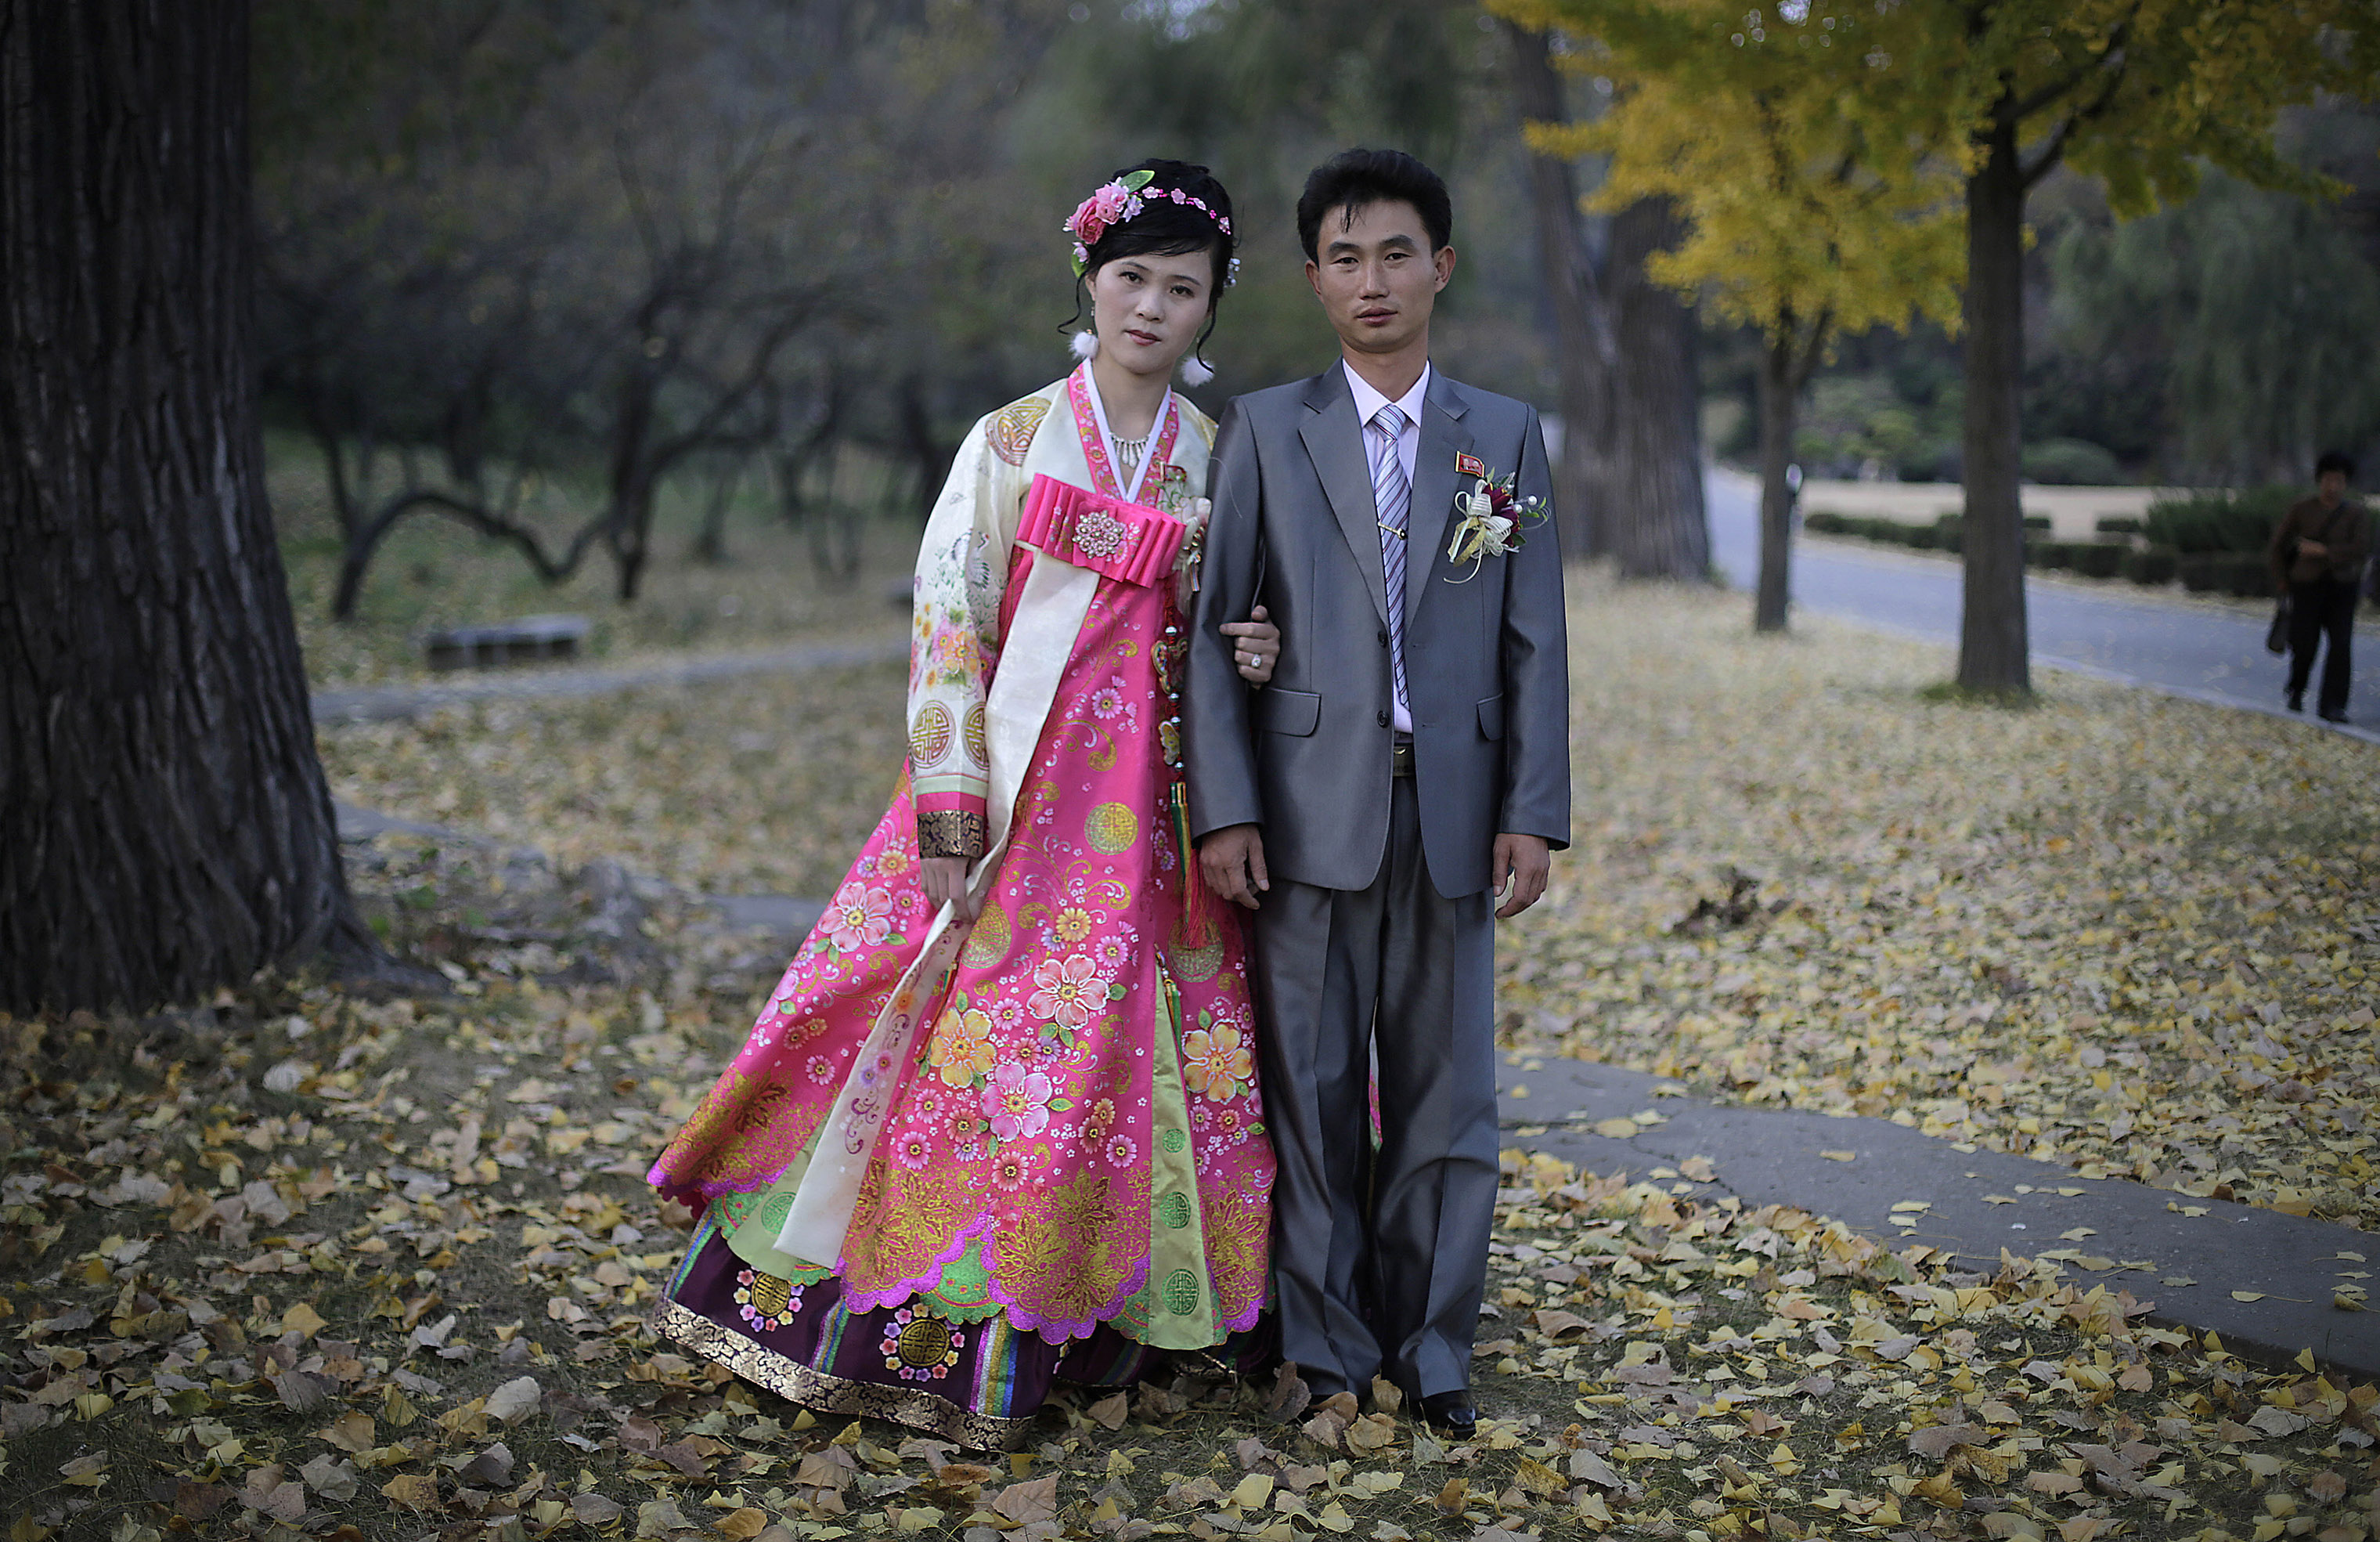 A bride and groom pose for a photograph at the hill where they went to take wedding pictures in Pyongyang on Oct. 25, 2014. (Wong Maye-E—AP/Shutterstock)